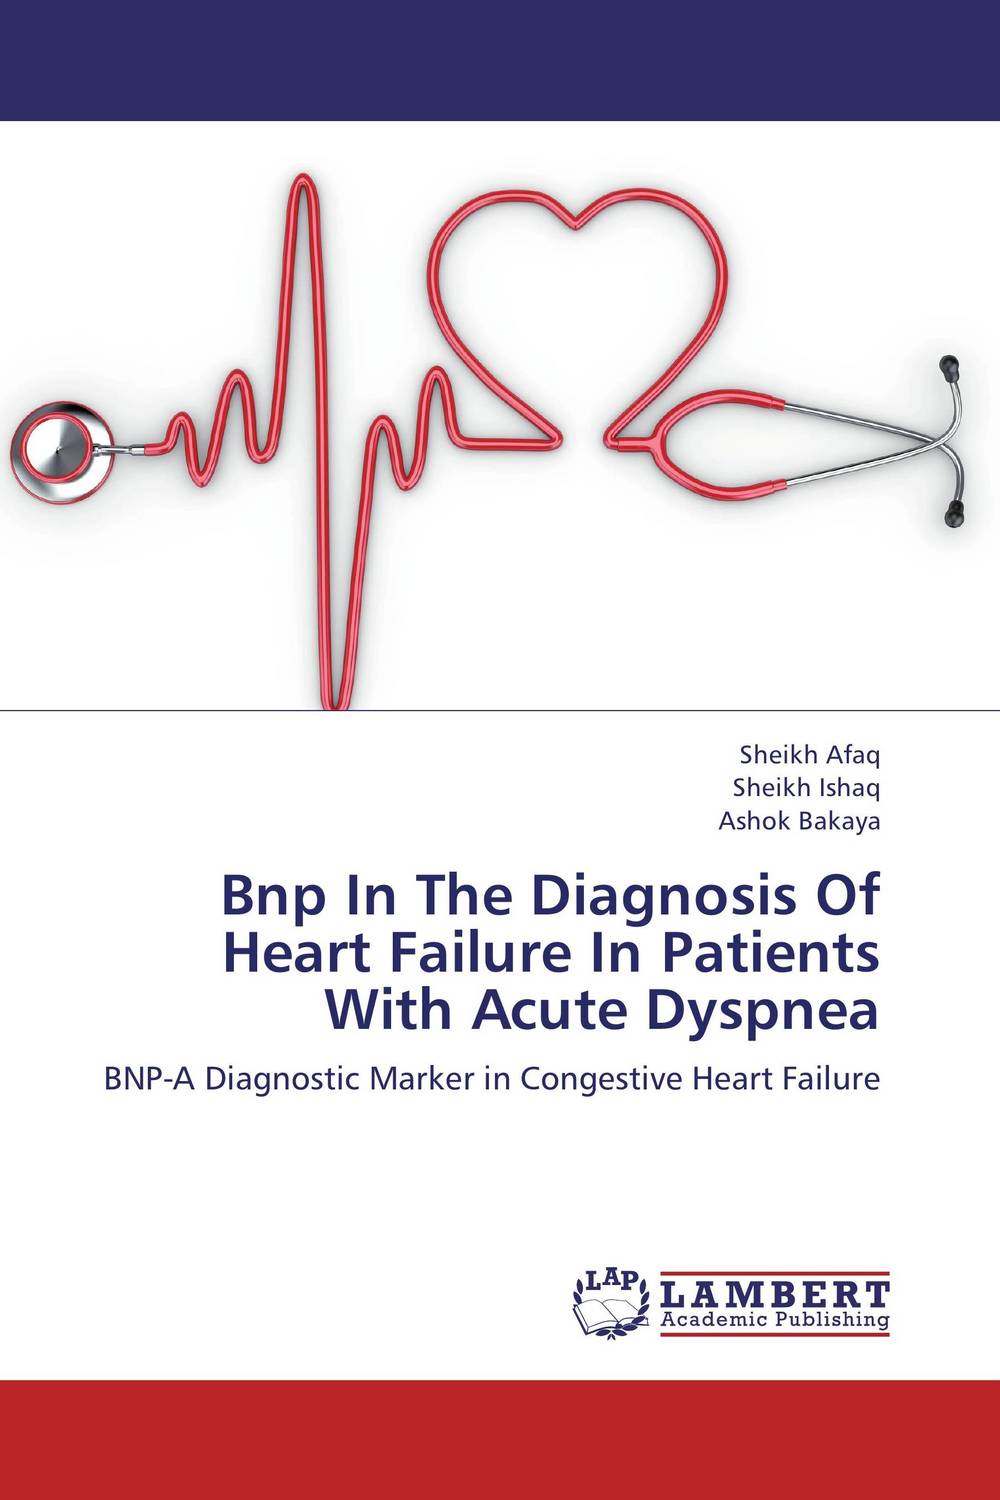 Bnp In The Diagnosis Of Heart Failure In Patients With Acute Dyspnea